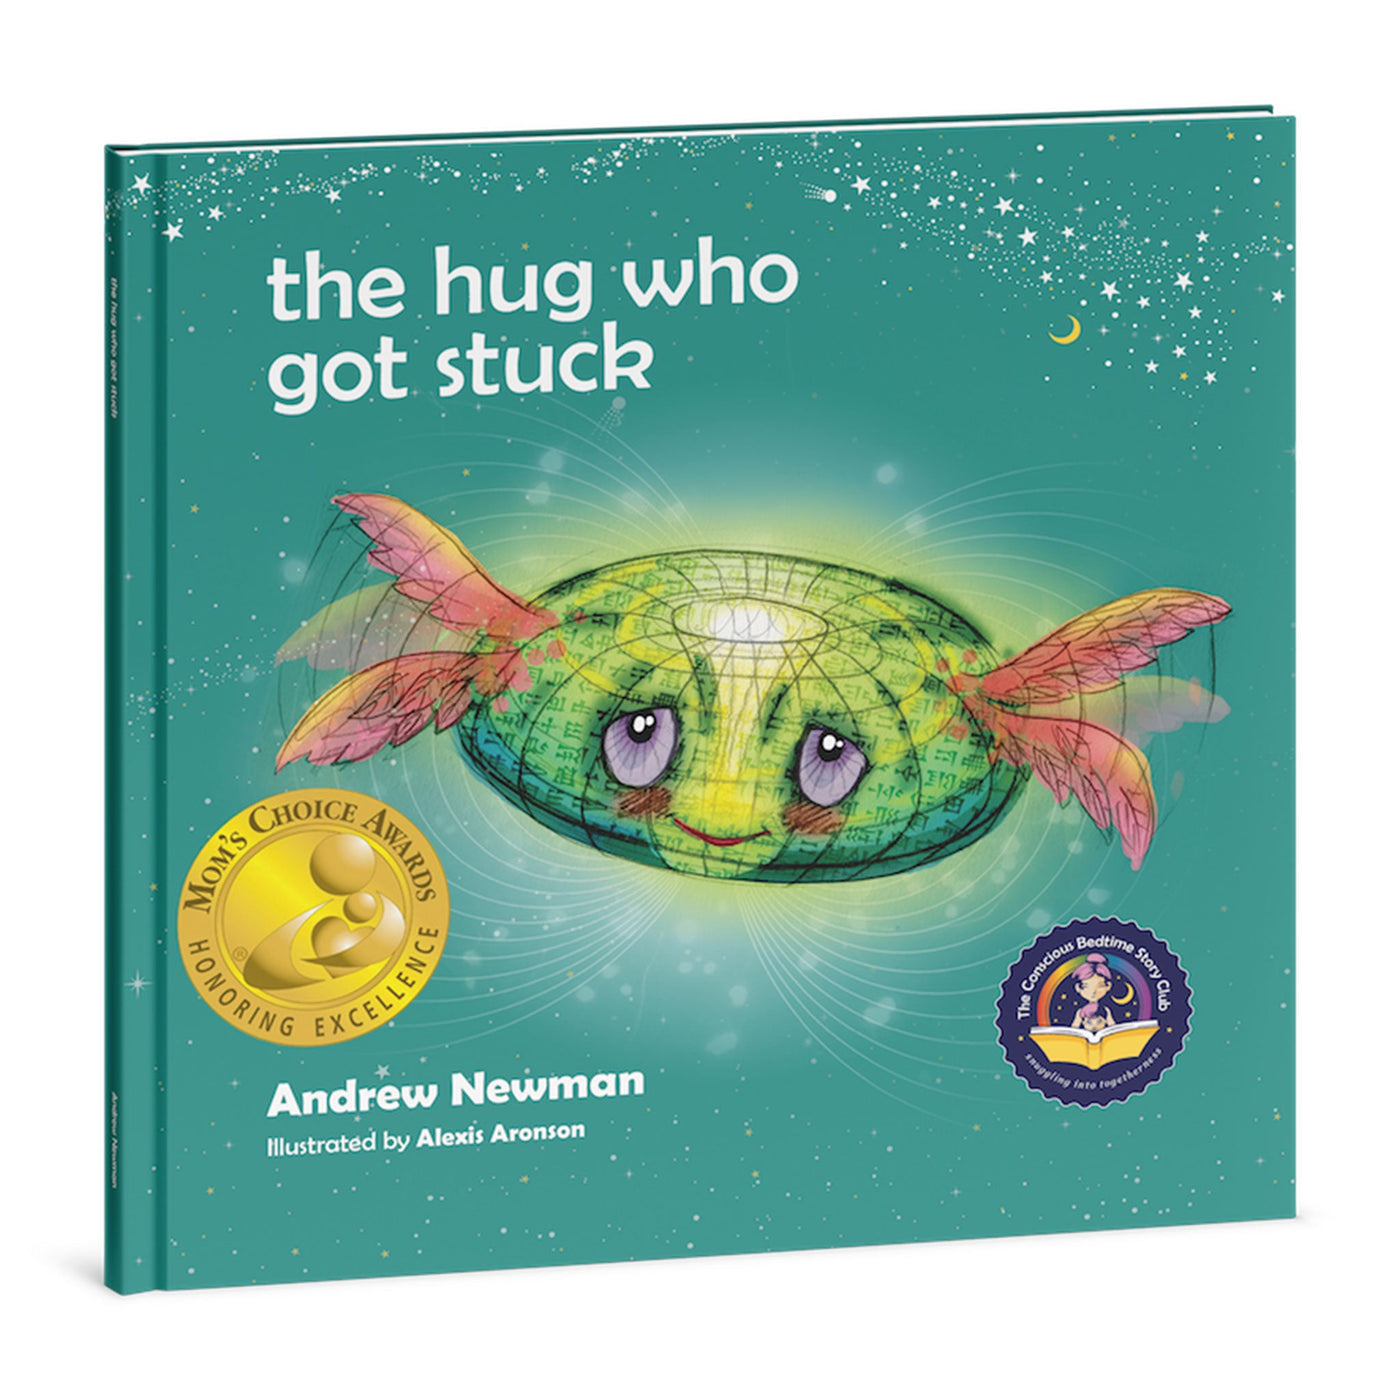 The Hug Who Got Stuck Plush Toy: Helping your kids to feel safe, loved and connected.